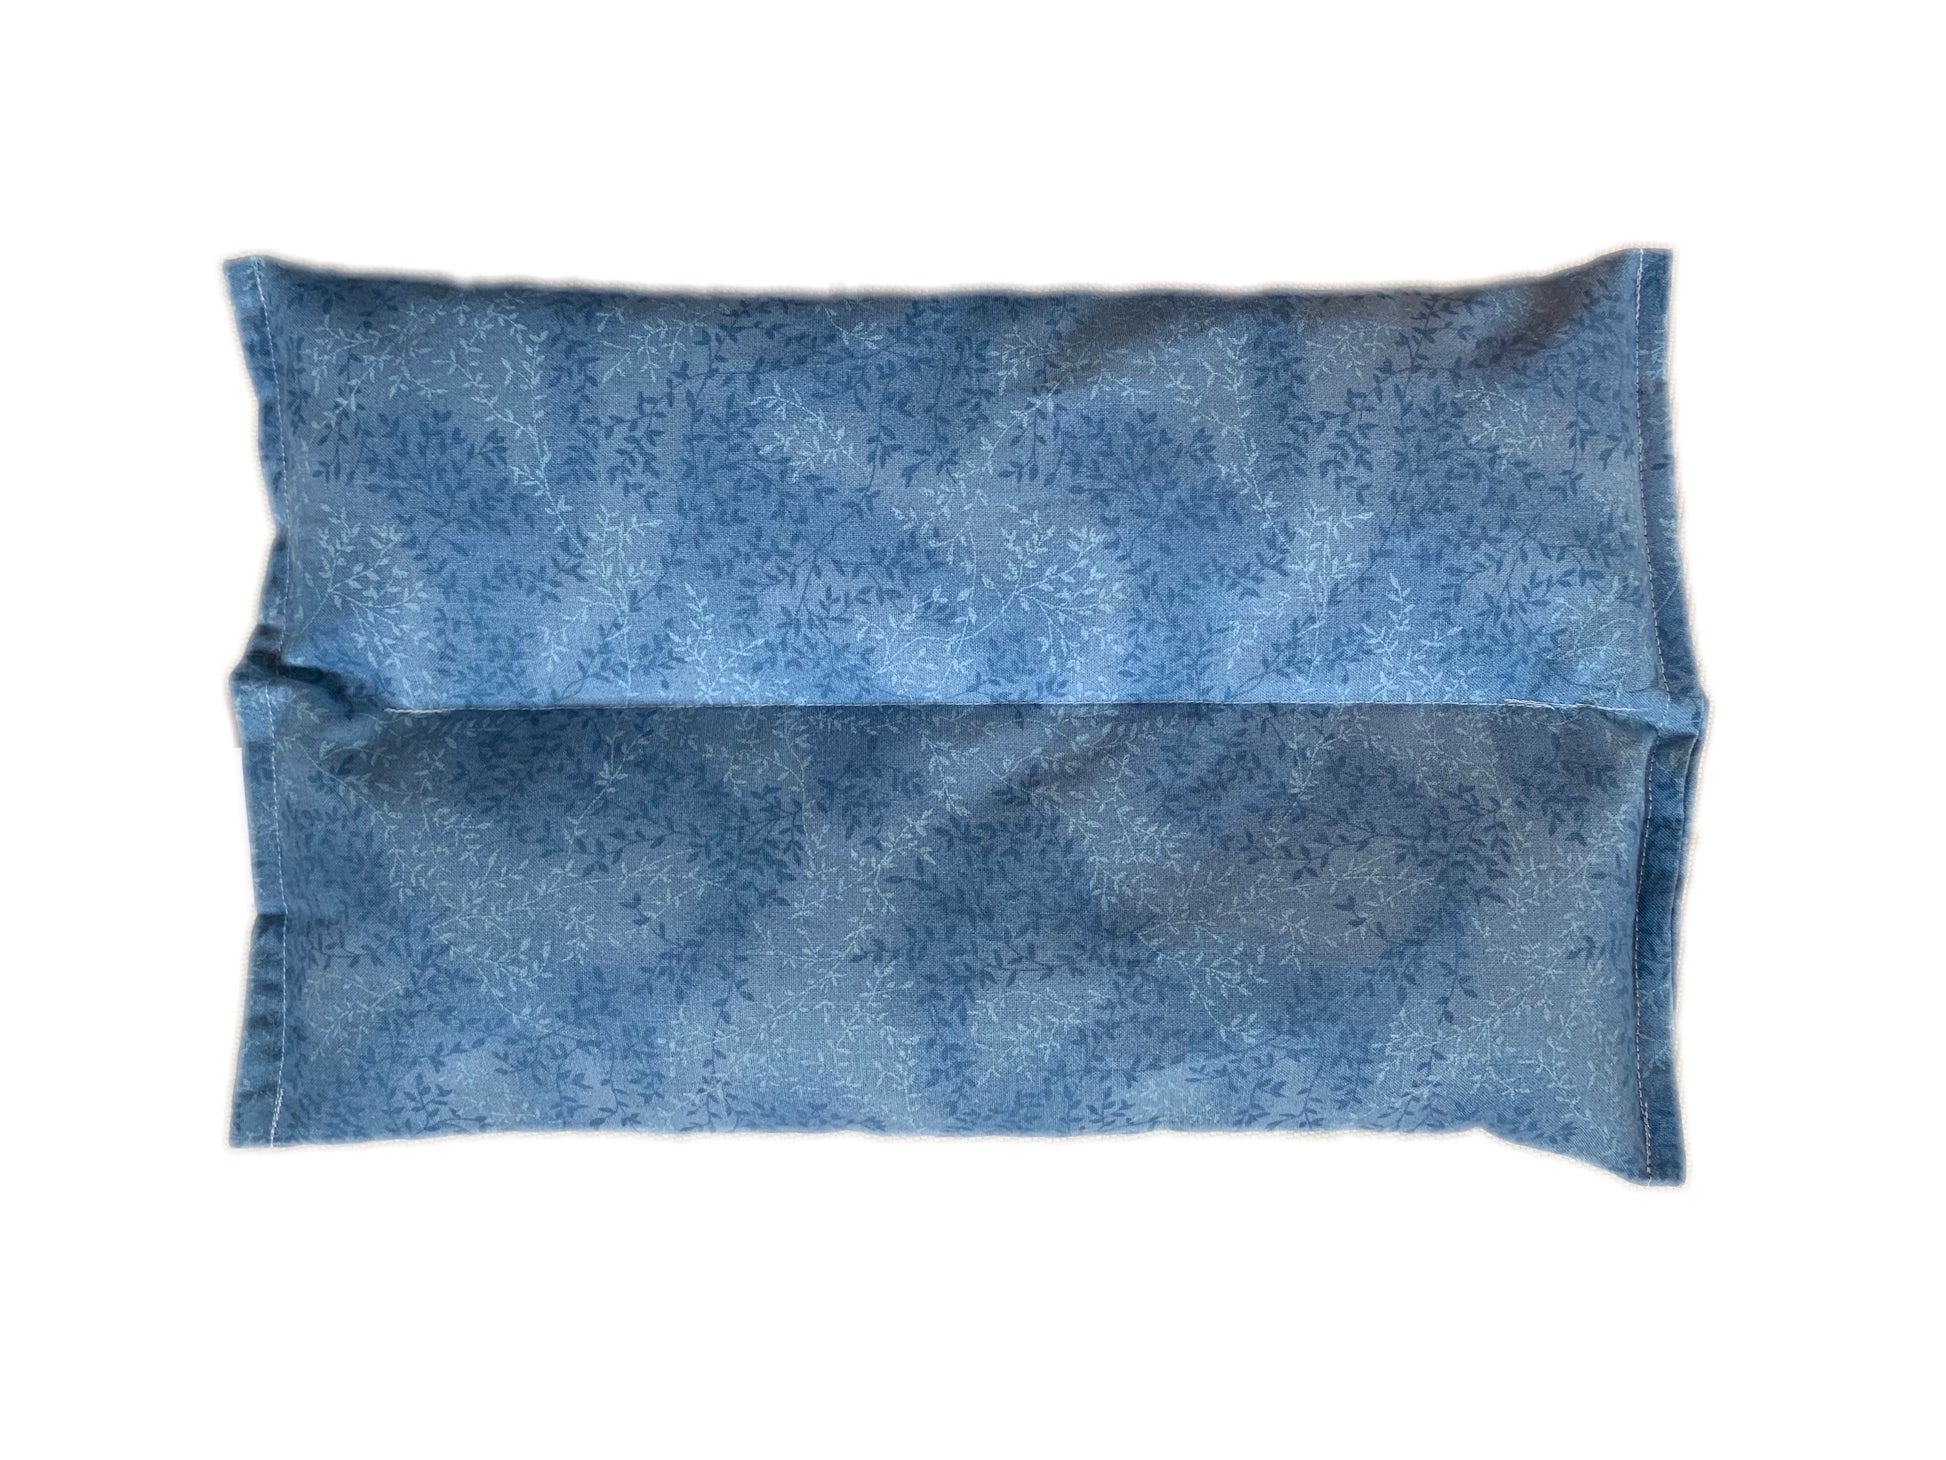 Hot Therapy Relief XL, Microwavable Heating Pad, 18x7 – Sacksy Thyme